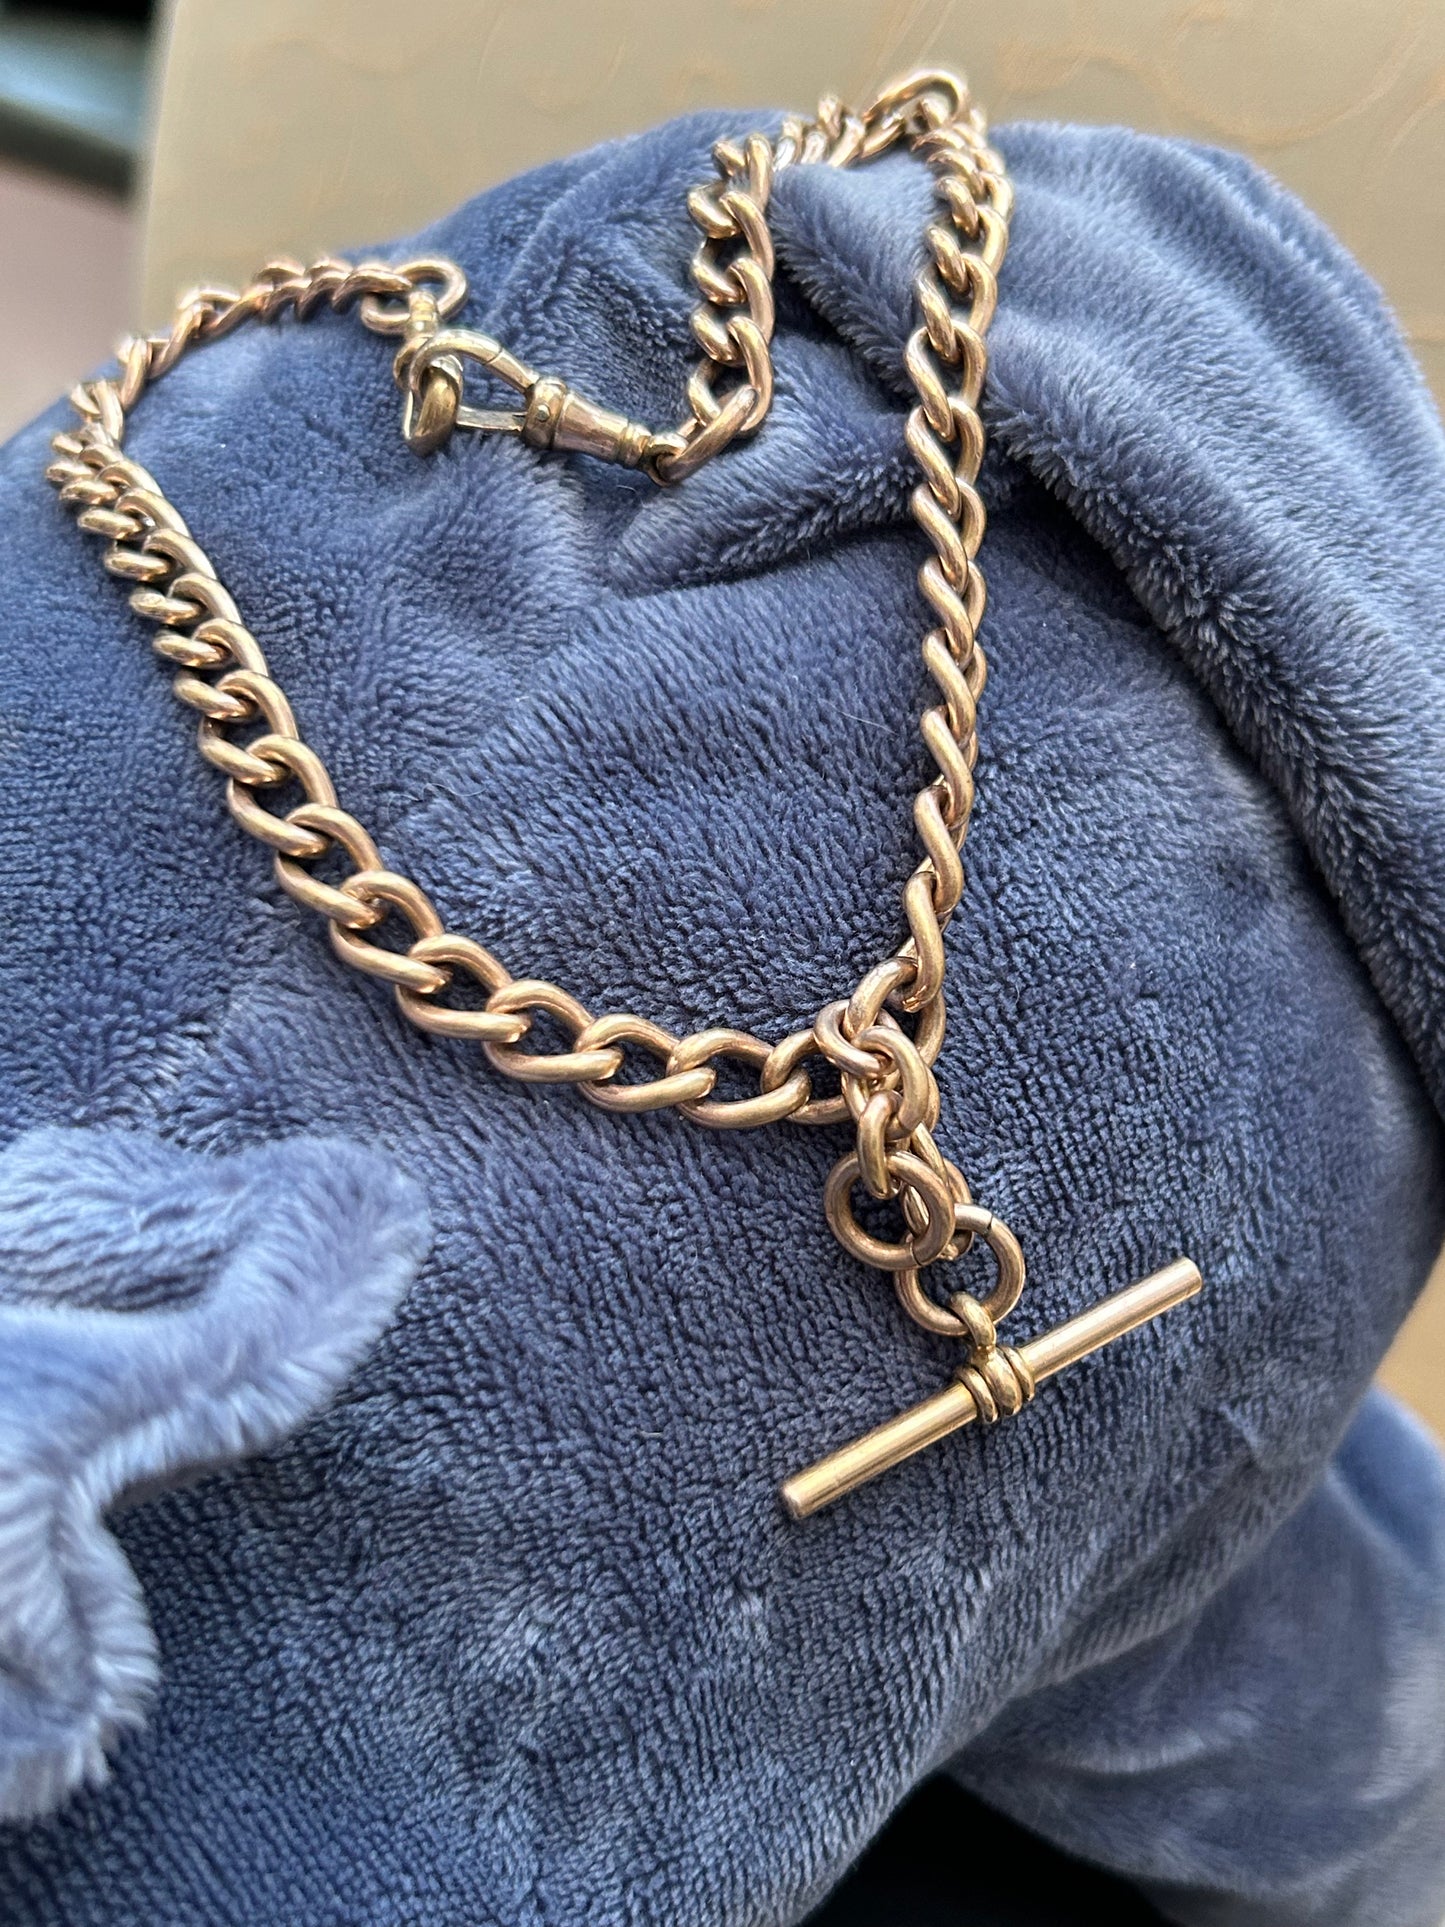 Antique rolled gold watch chain